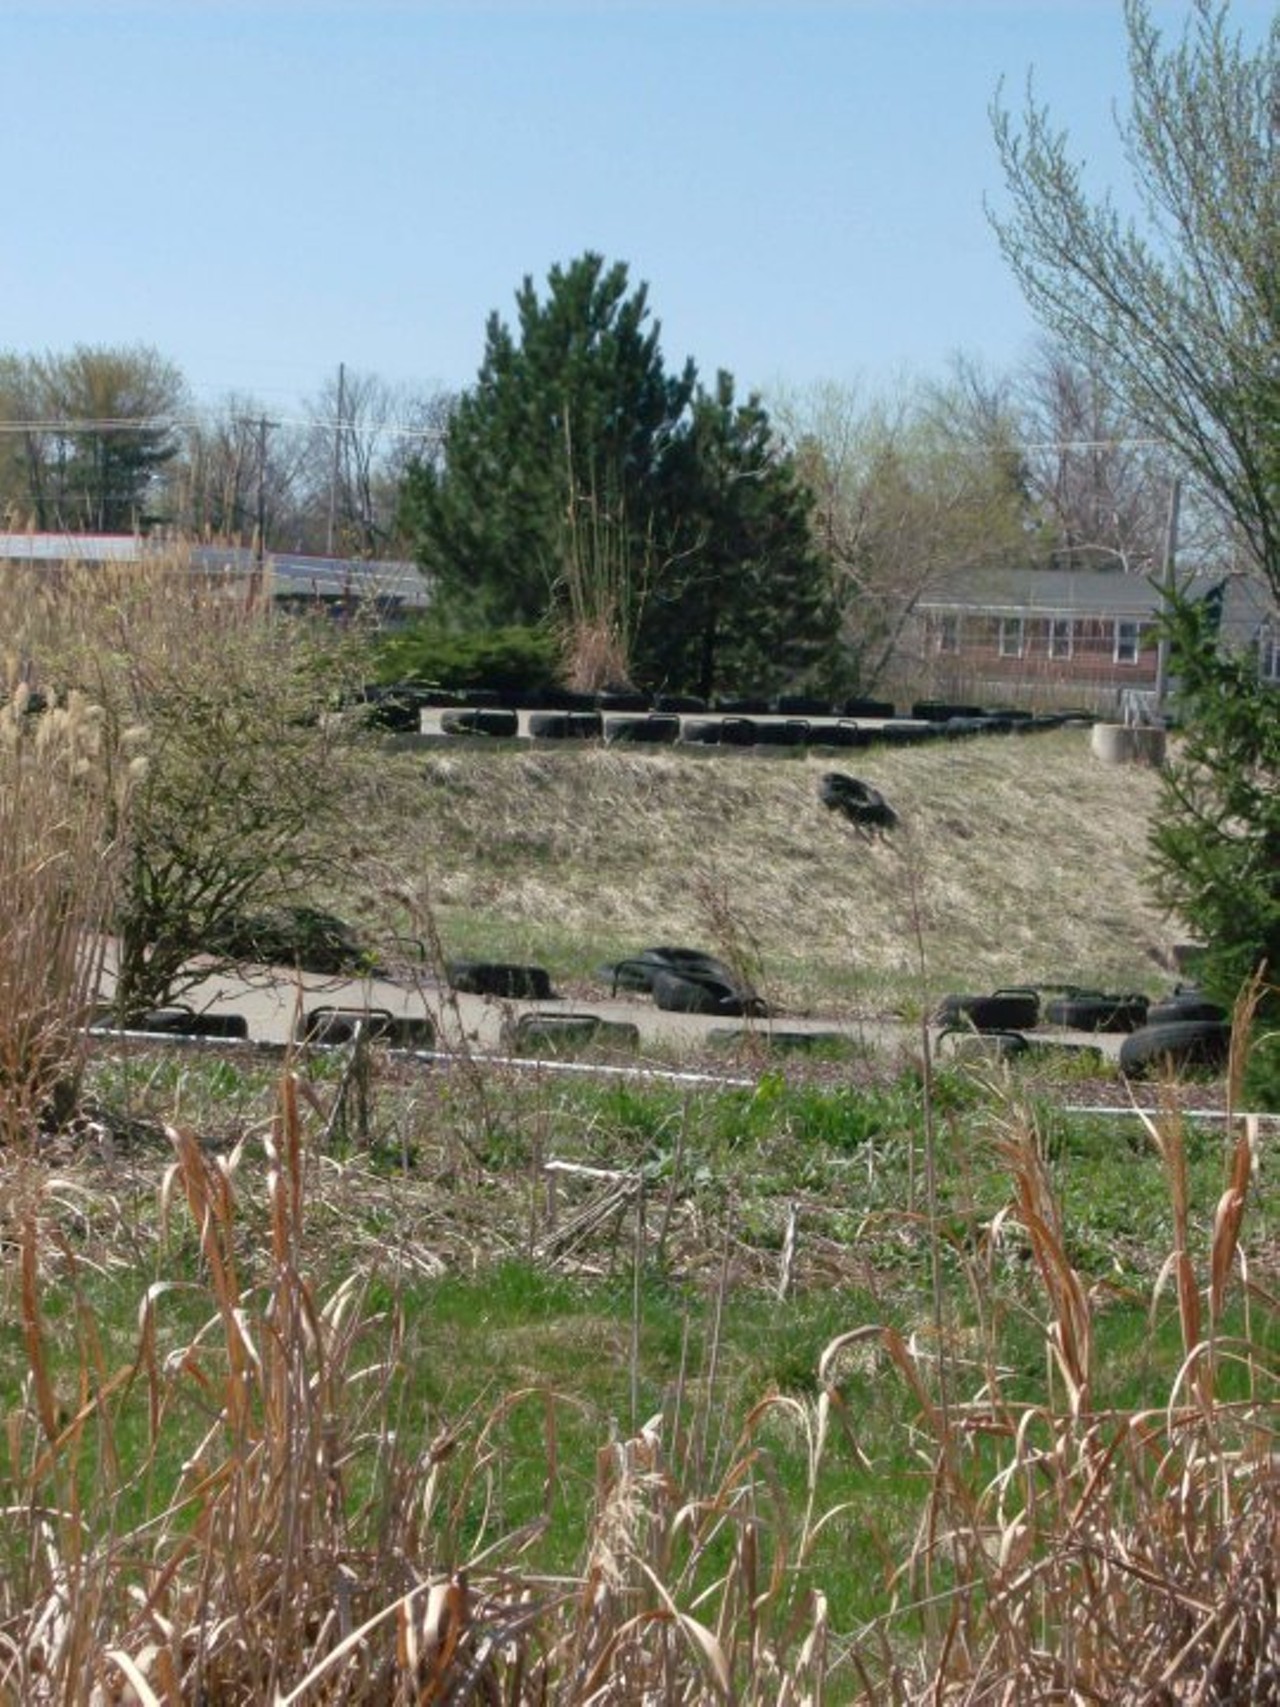 The remains of Thunder Alley Speedway